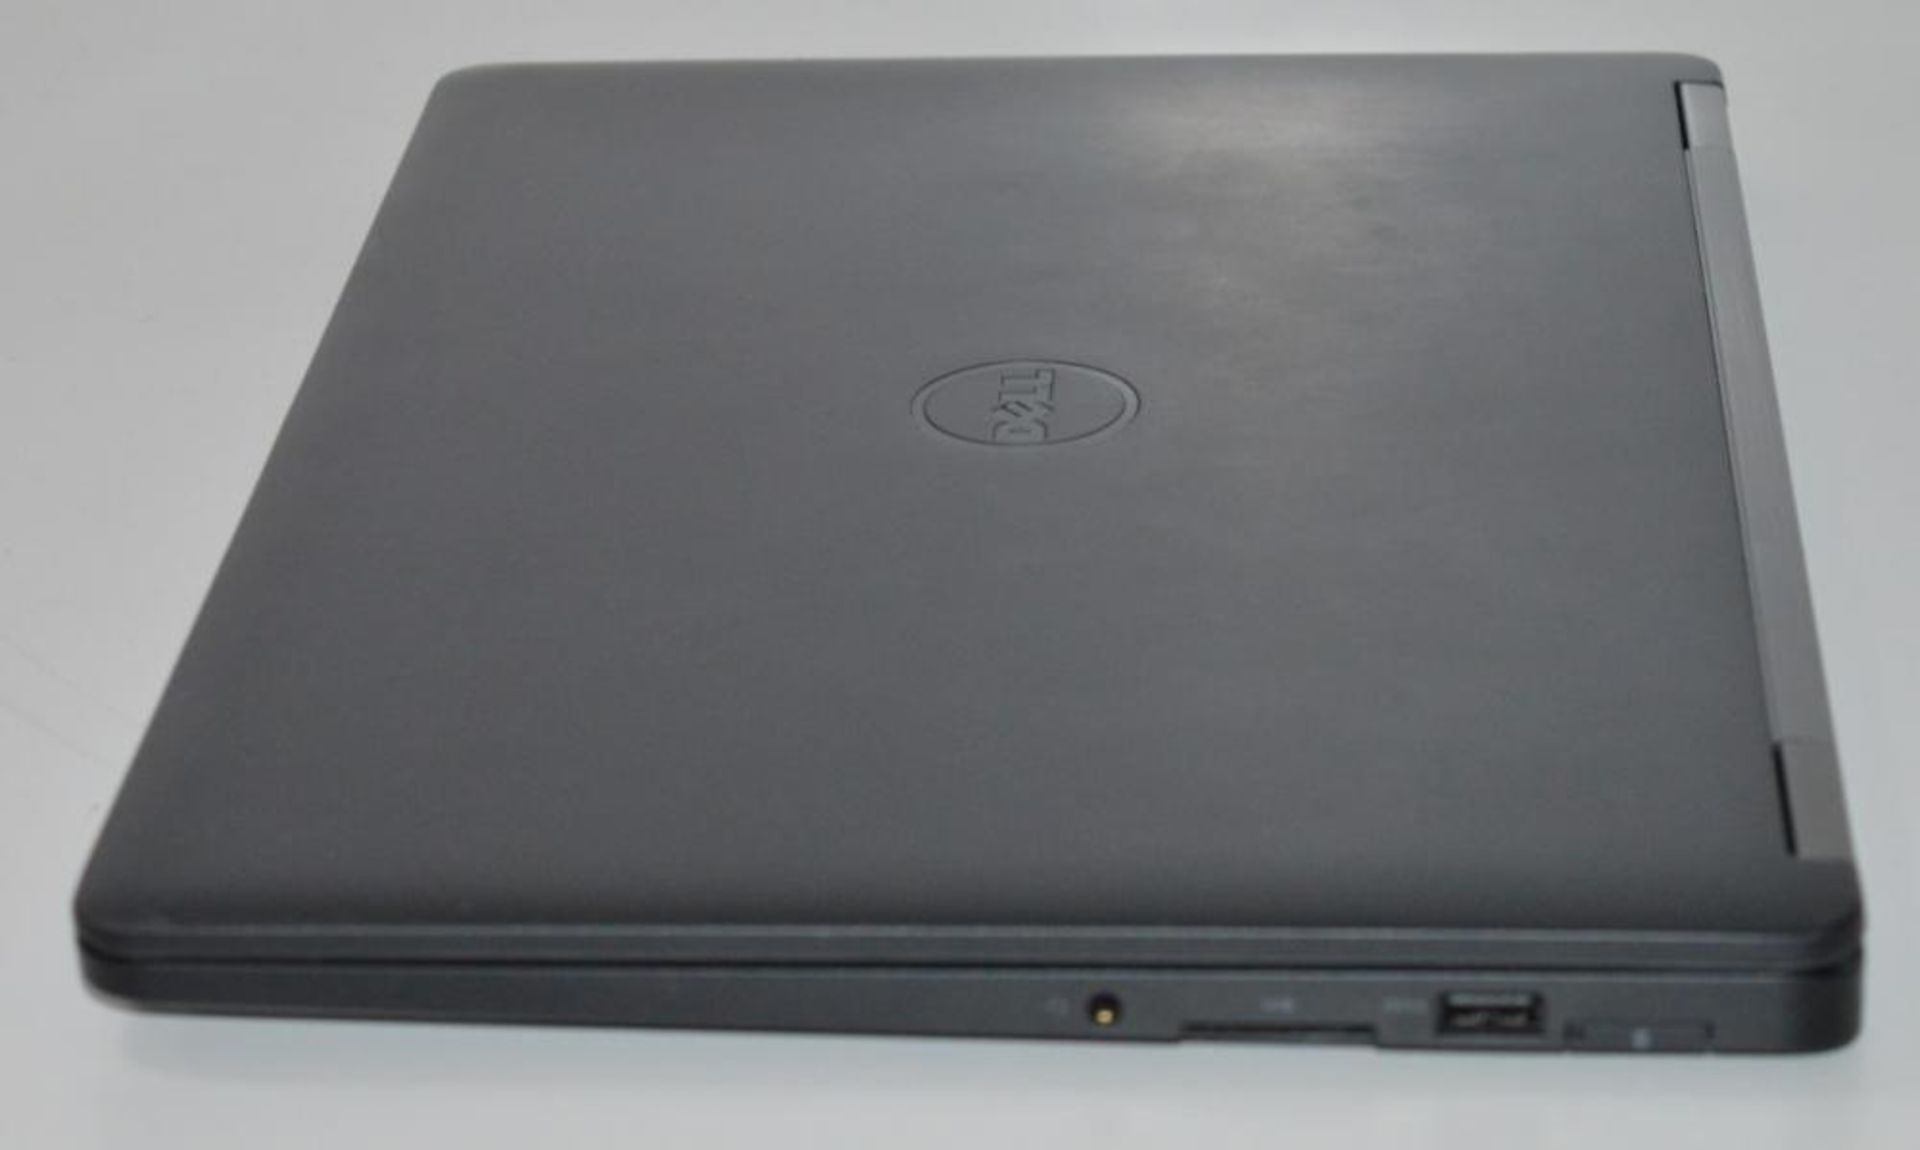 1 x Dell Latitude E7470 Laptop Computer - 14 Inch FHD Screen - Features Include a 6th Gen Core i7- - Image 7 of 14